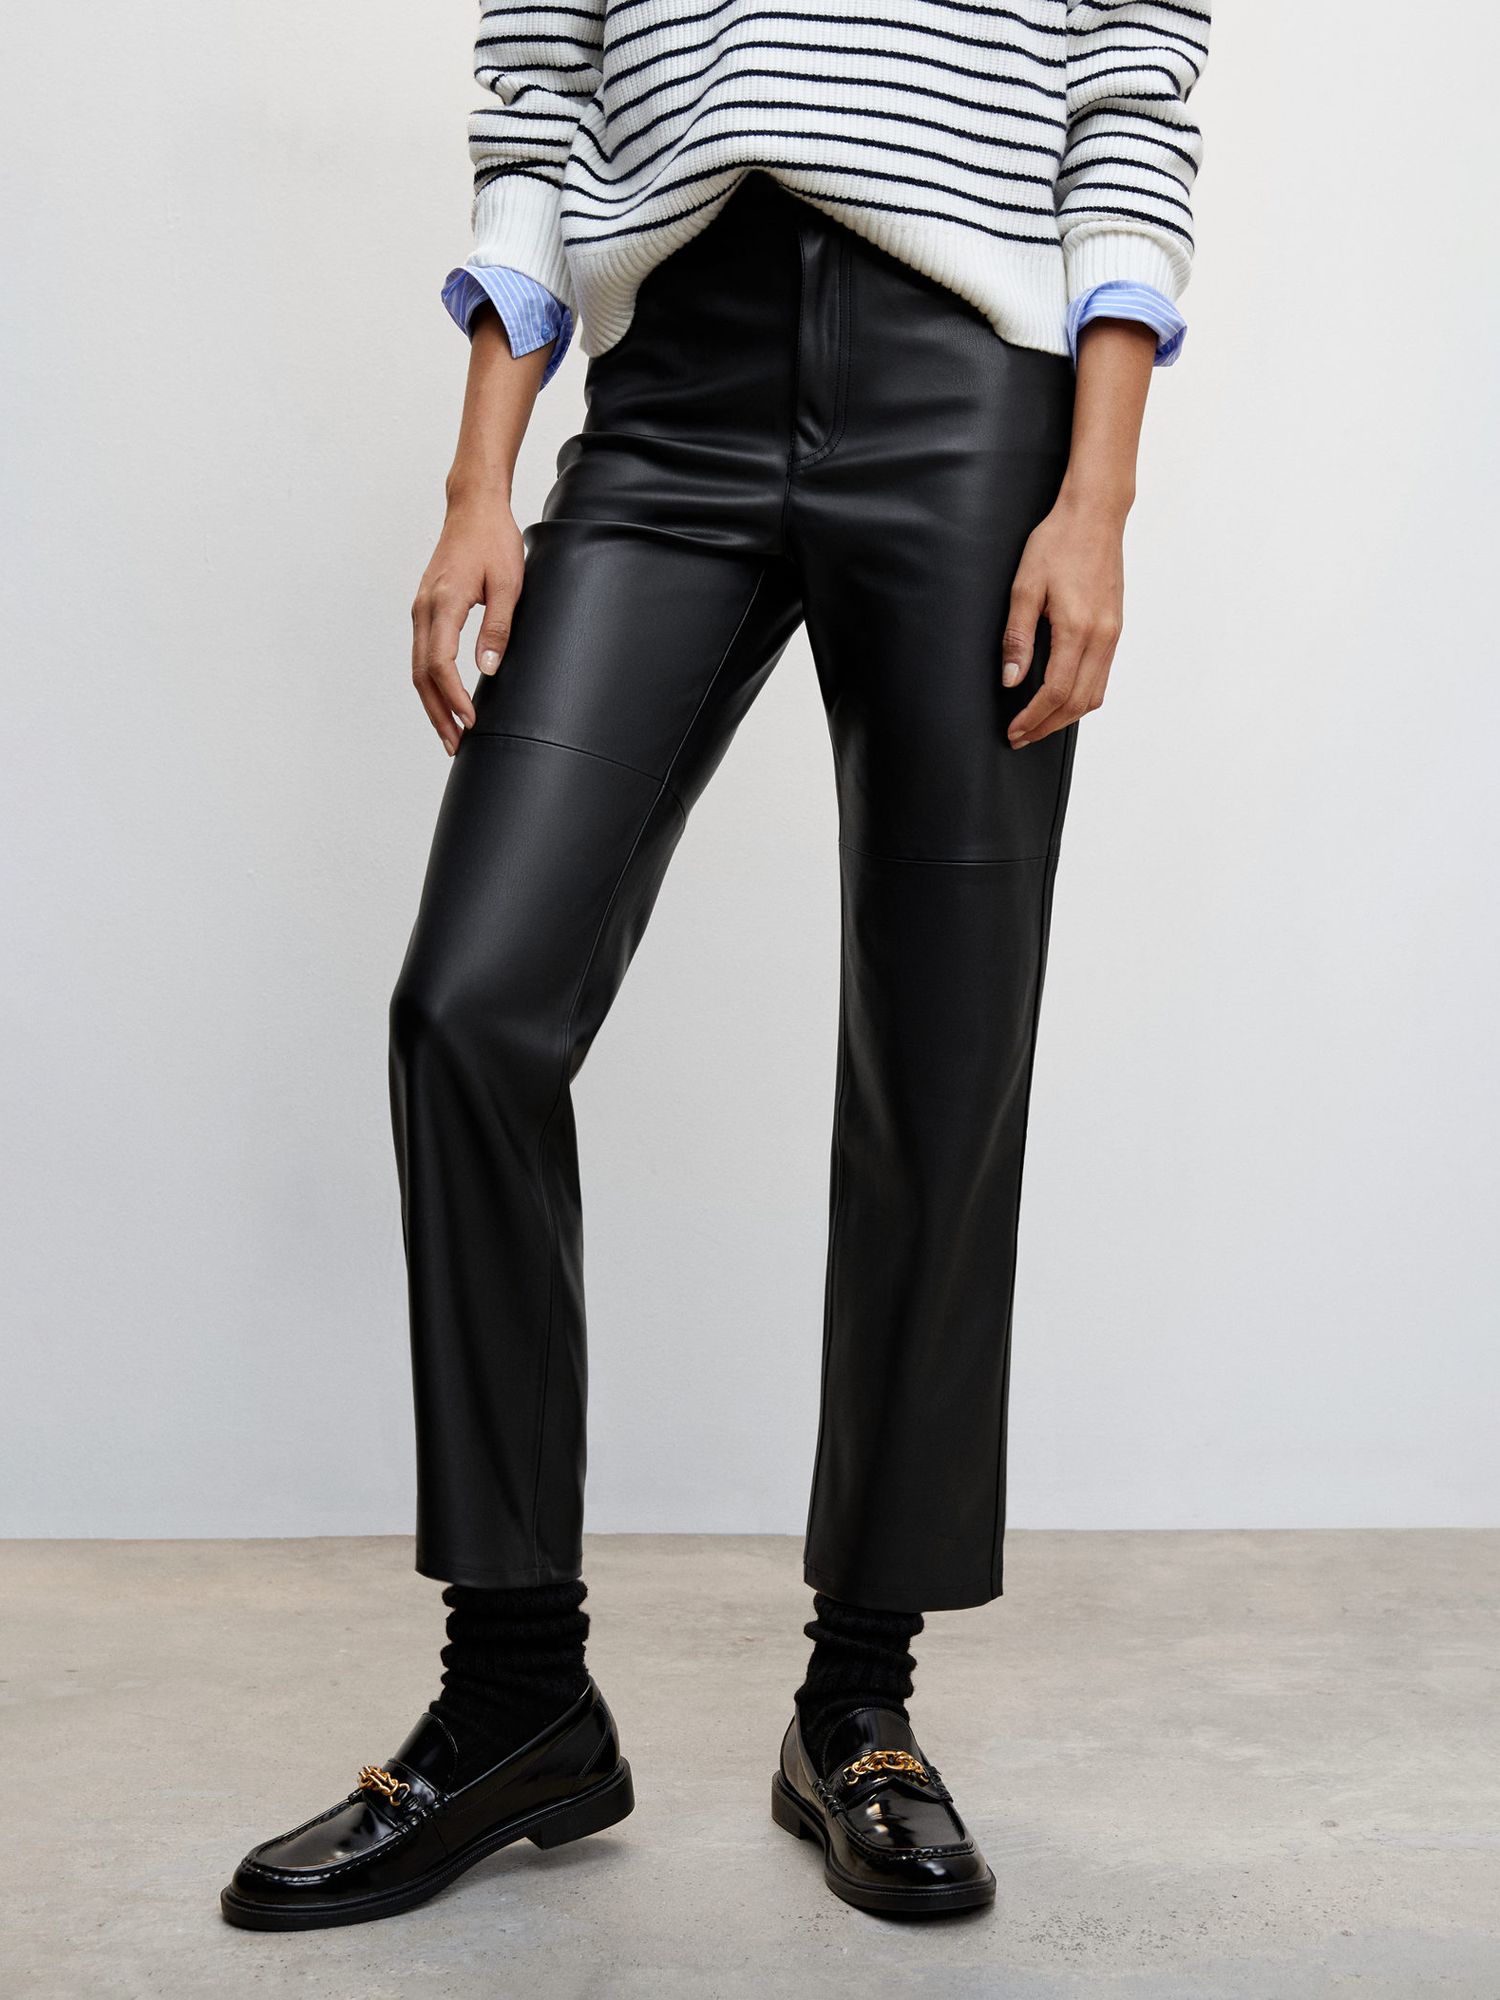 Mango Lille Slim Fit Faux Leather Trousers, Black at John Lewis & Partners